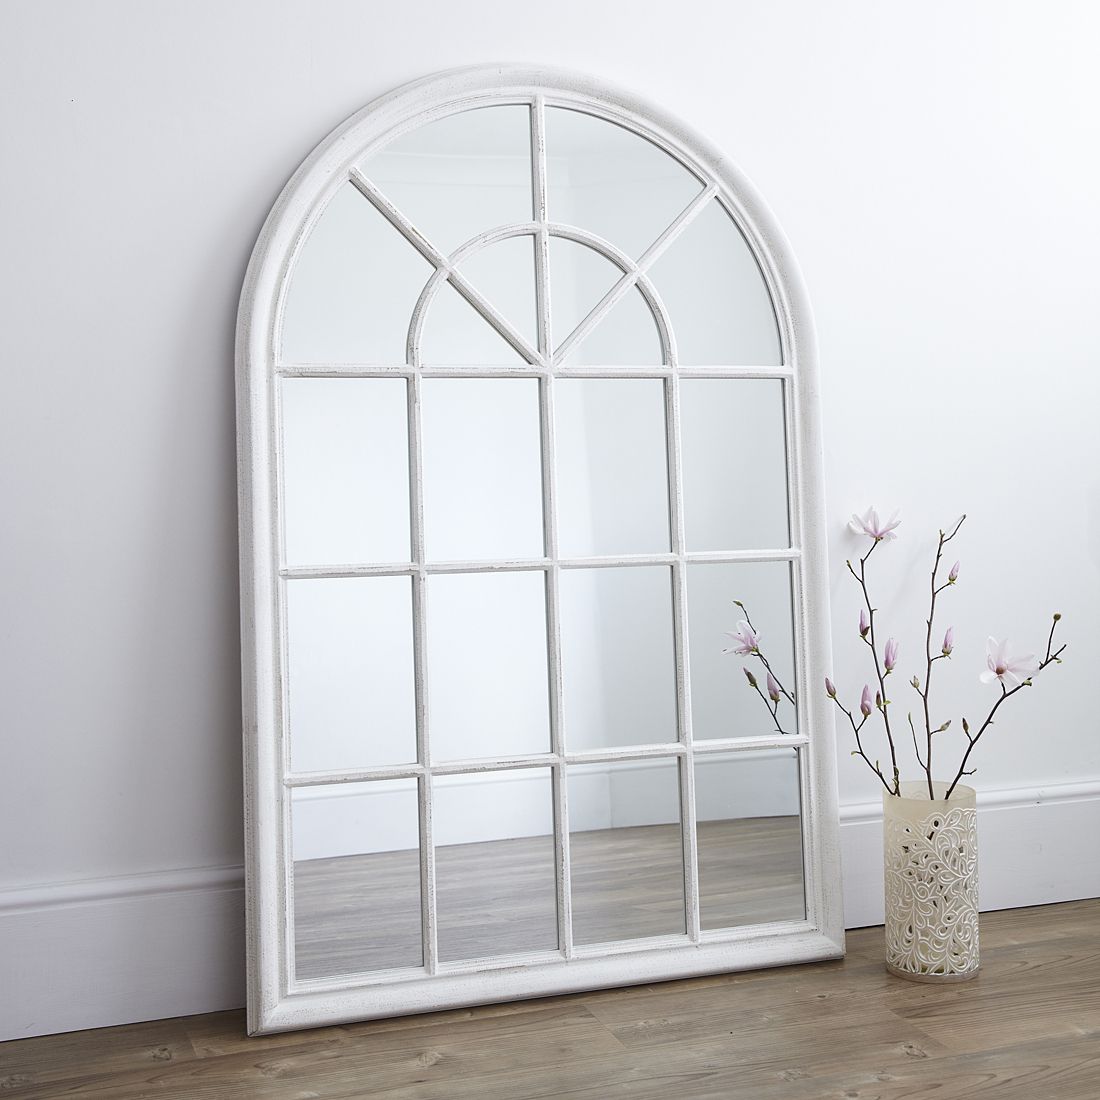 Most Popular Arch Wall Mirrors Throughout White Arched Window Wall Mirror (View 9 of 20)